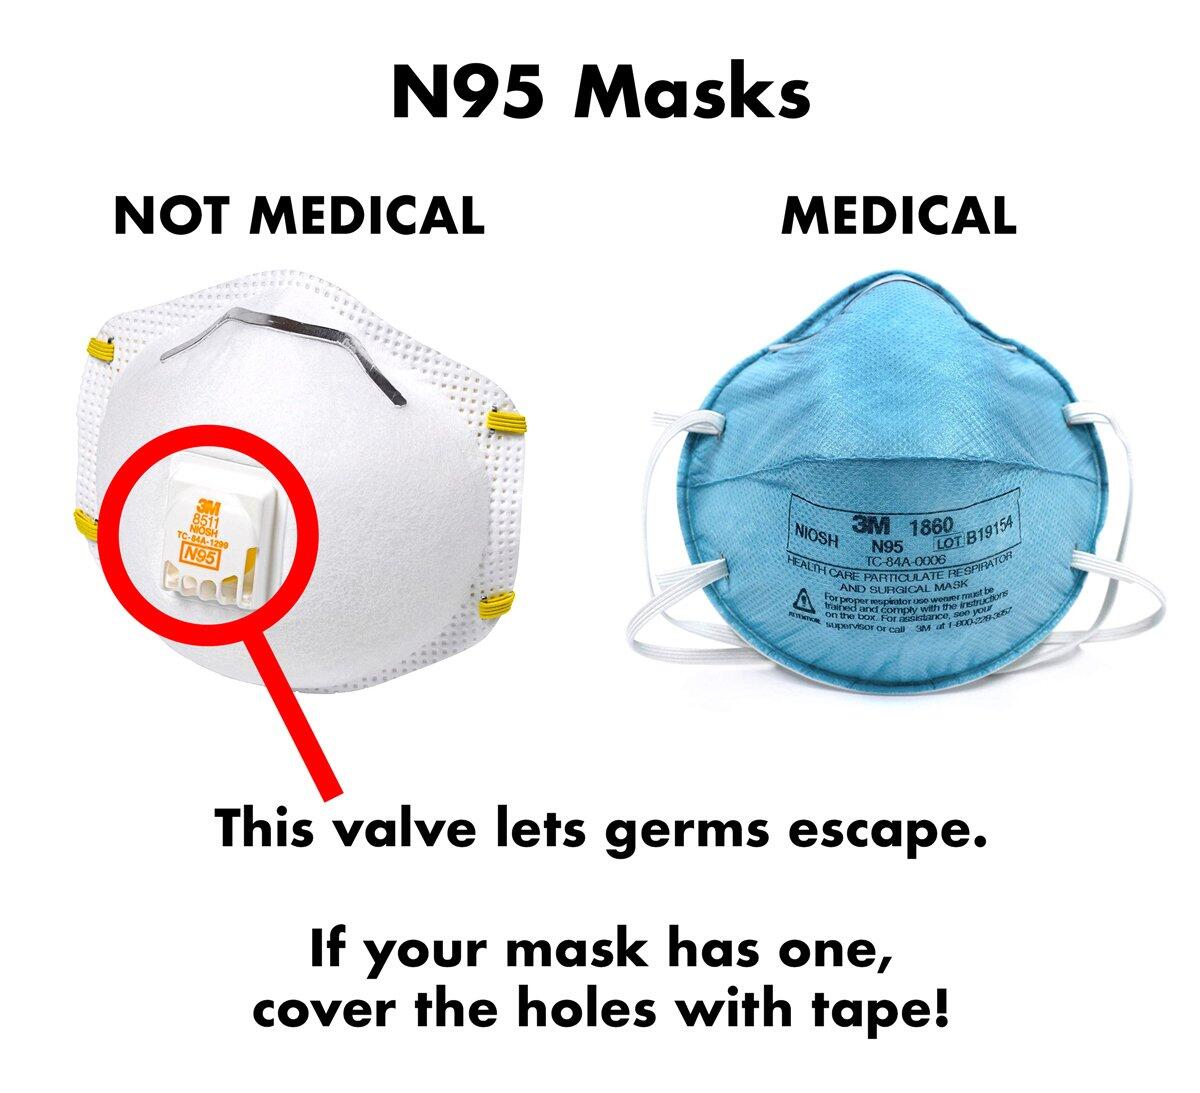 An N95 mask that has a valve can let germs escape.